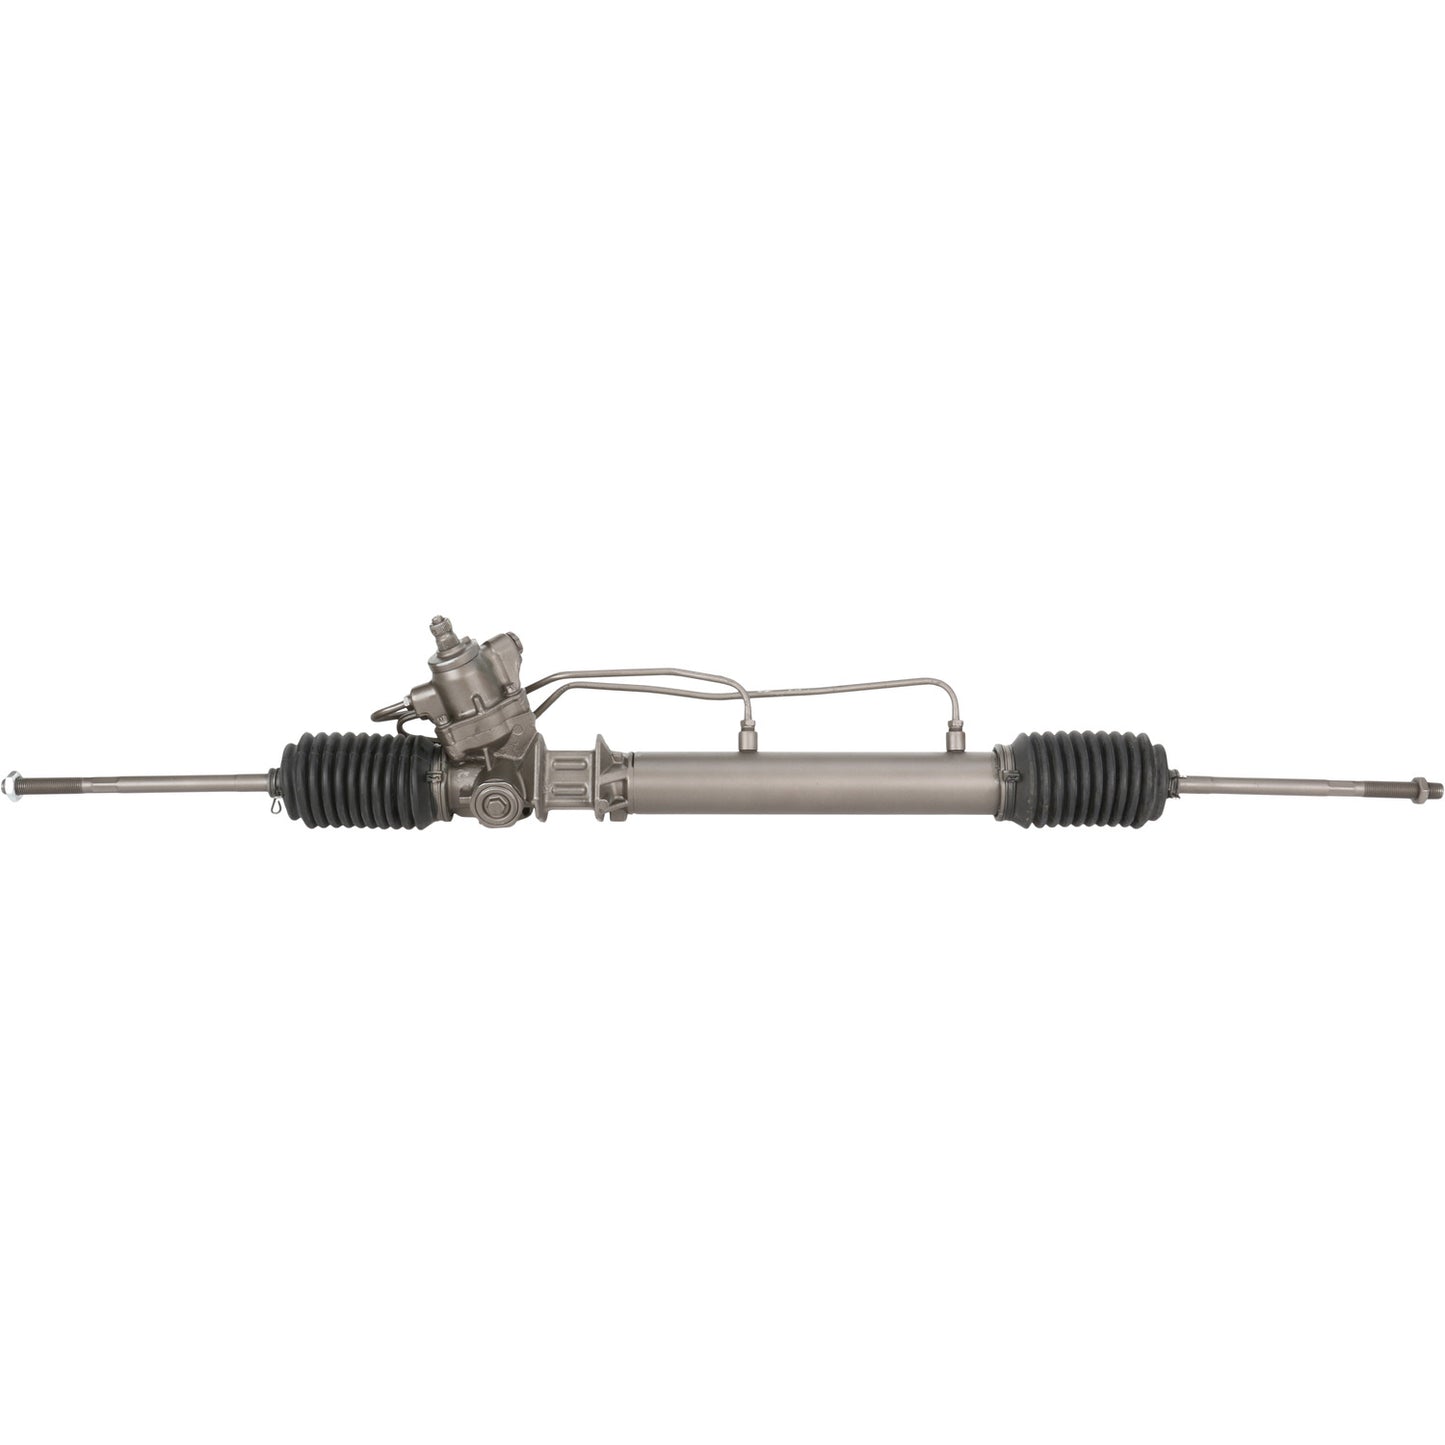 Rack and Pinion Assembly - MAVAL - Hydraulic Power - Remanufactured - 9112M